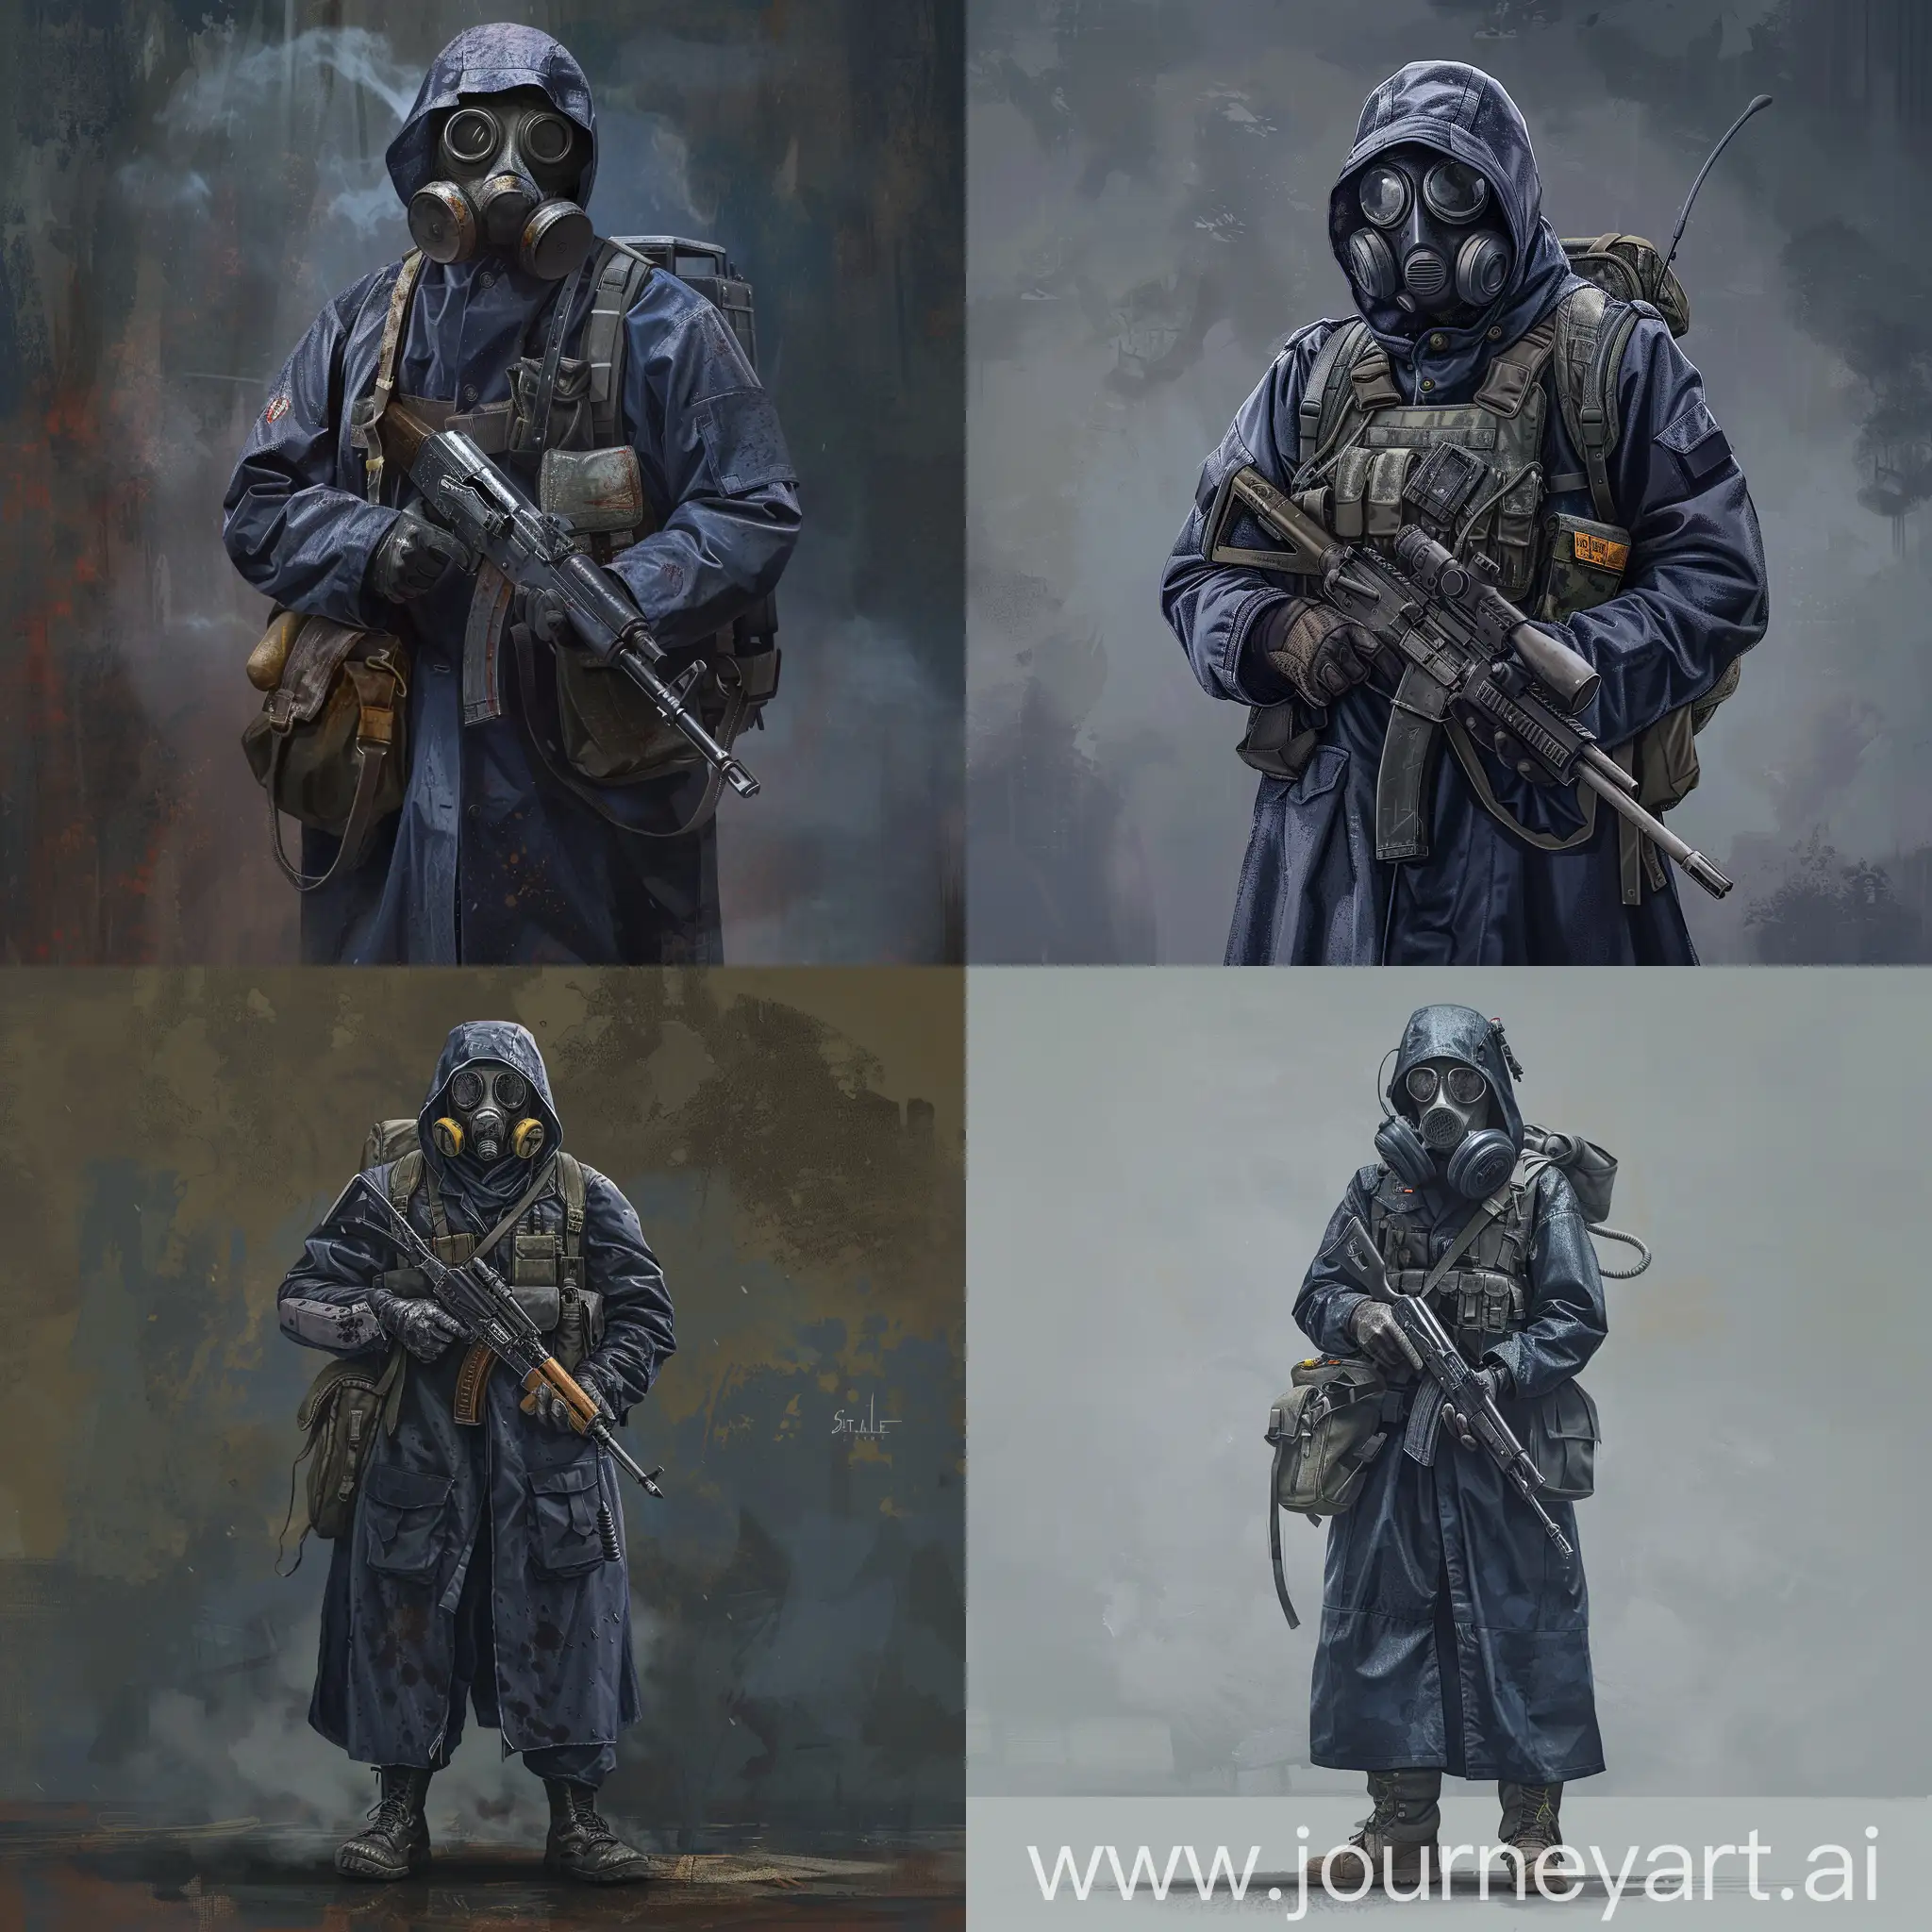 Concept game art character, a mercenary from the universe of S.T.A.L.K.E.R., a mercenary dressed in a dark blue military raincoat, gray military armor on his body, a gas mask on his face, a small military backpack on his back, shotgun in his arms.